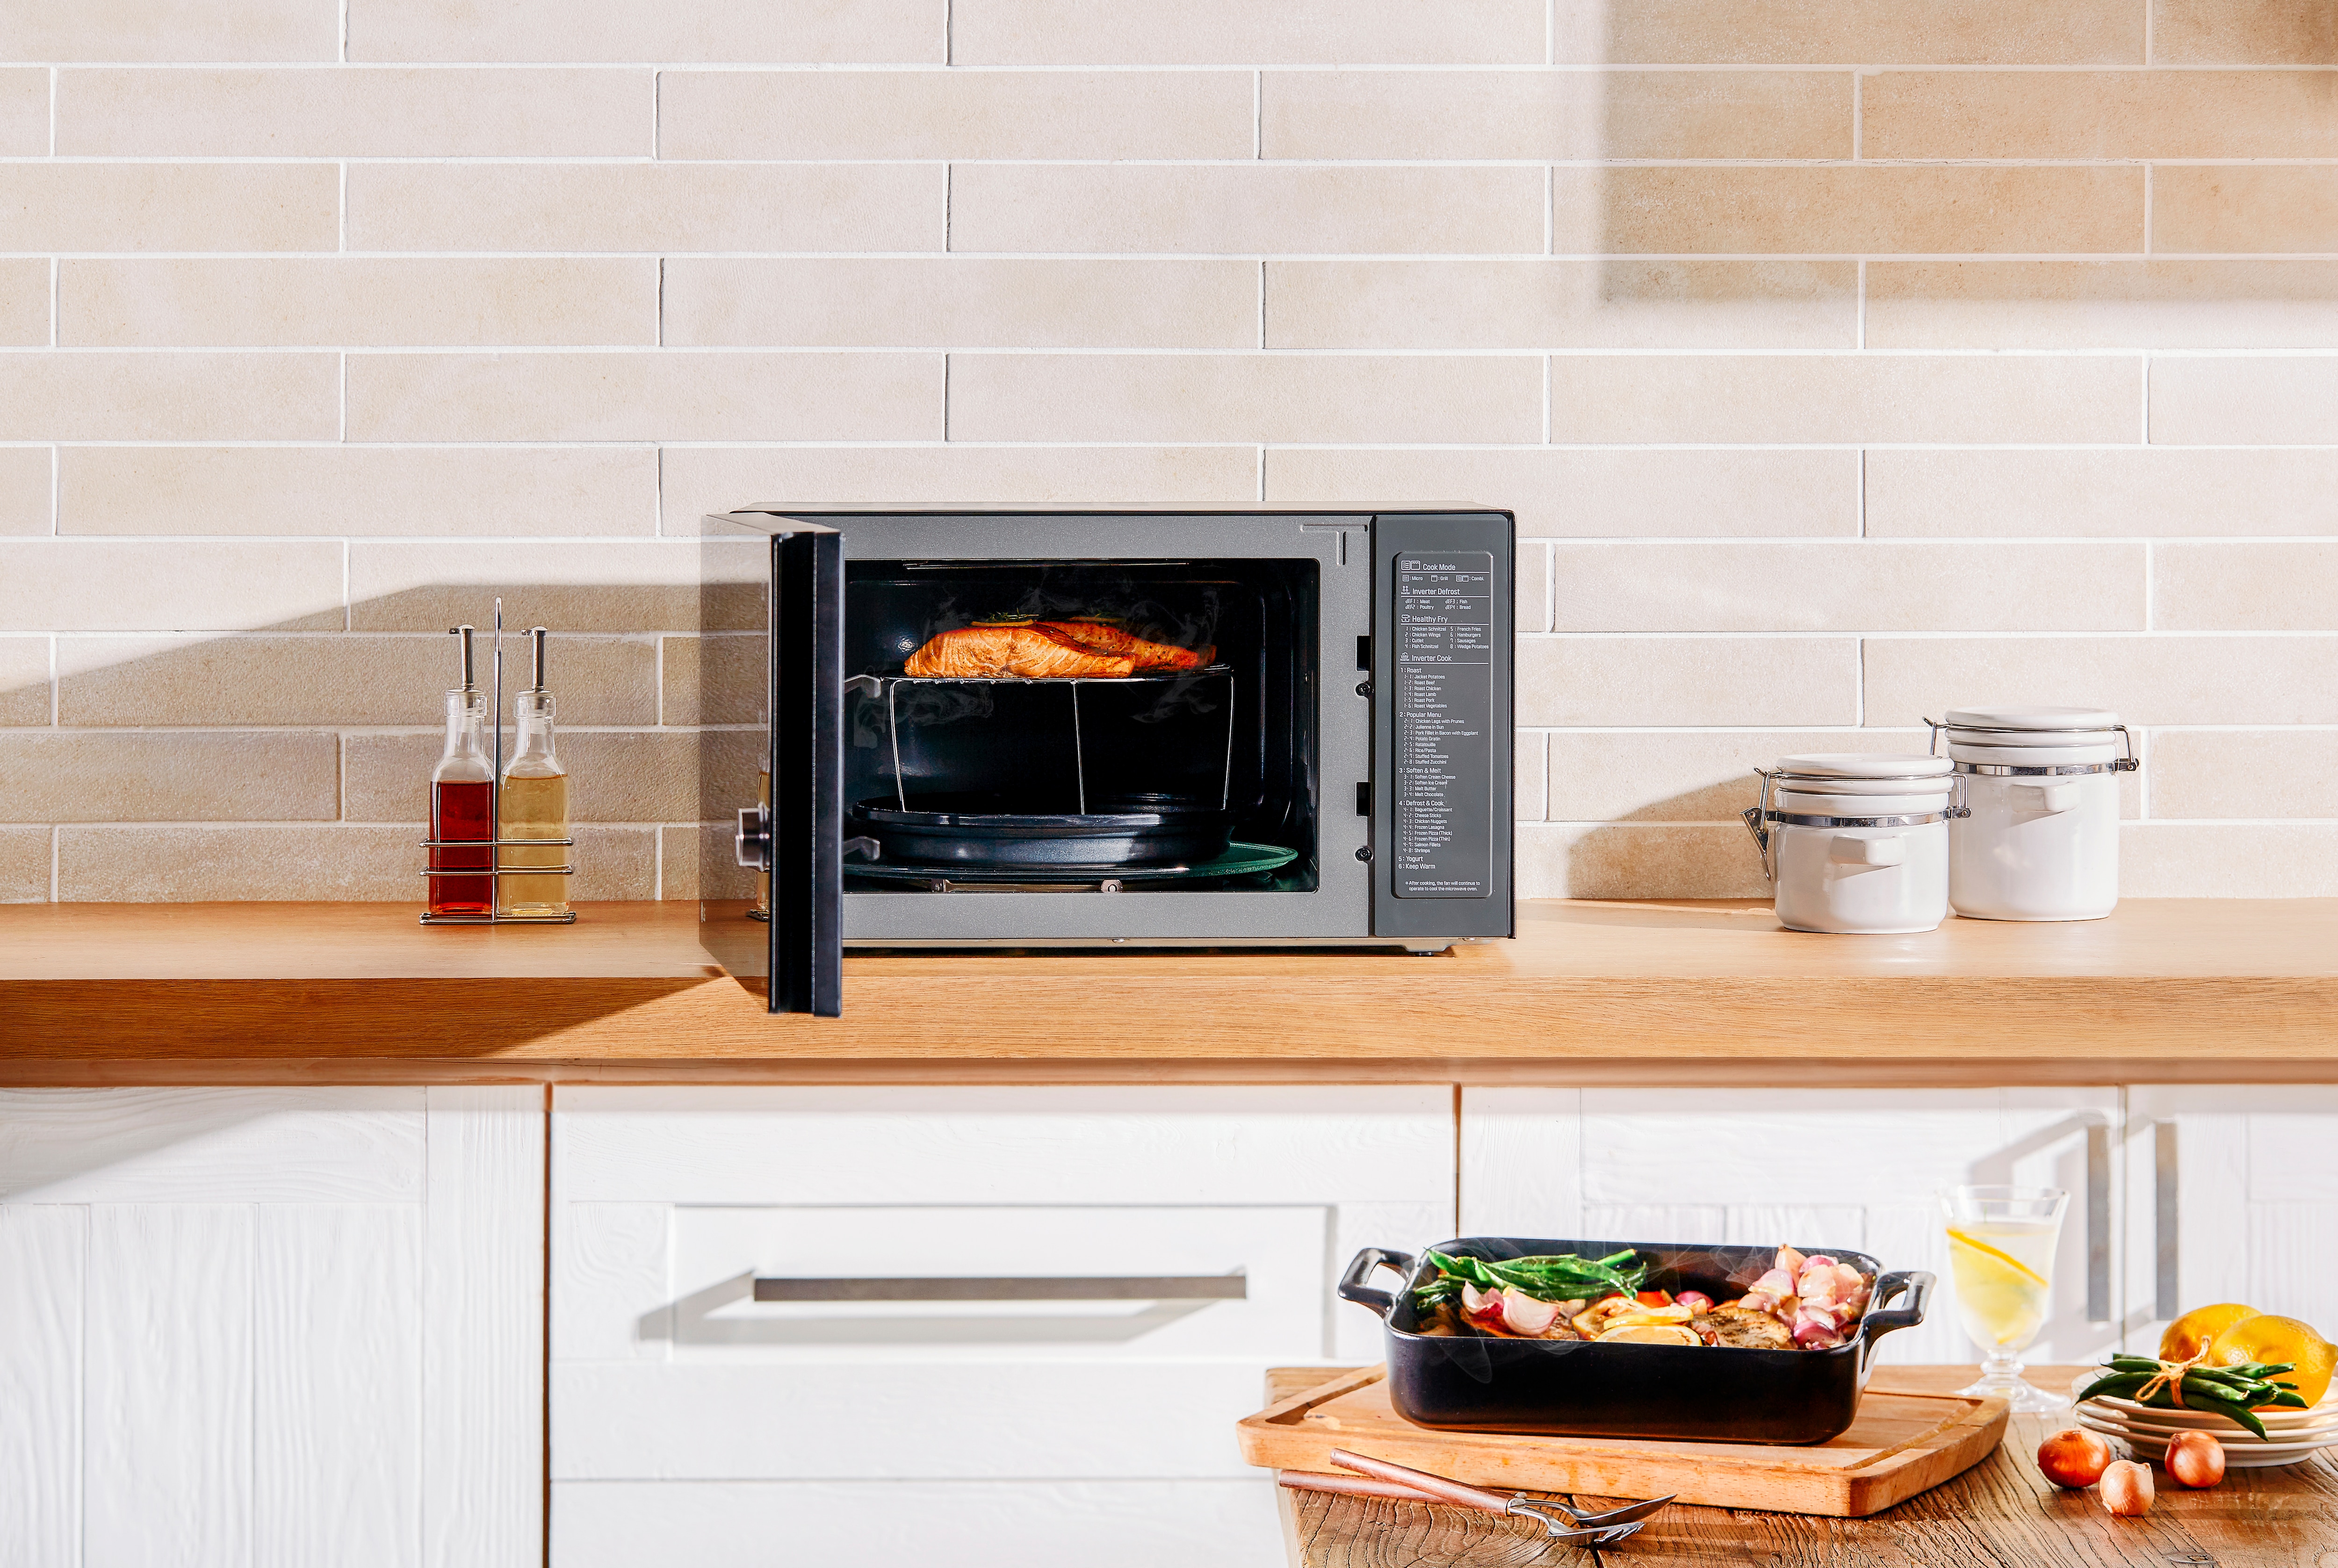 Cook with Ease with LG’s NeoChef
                    